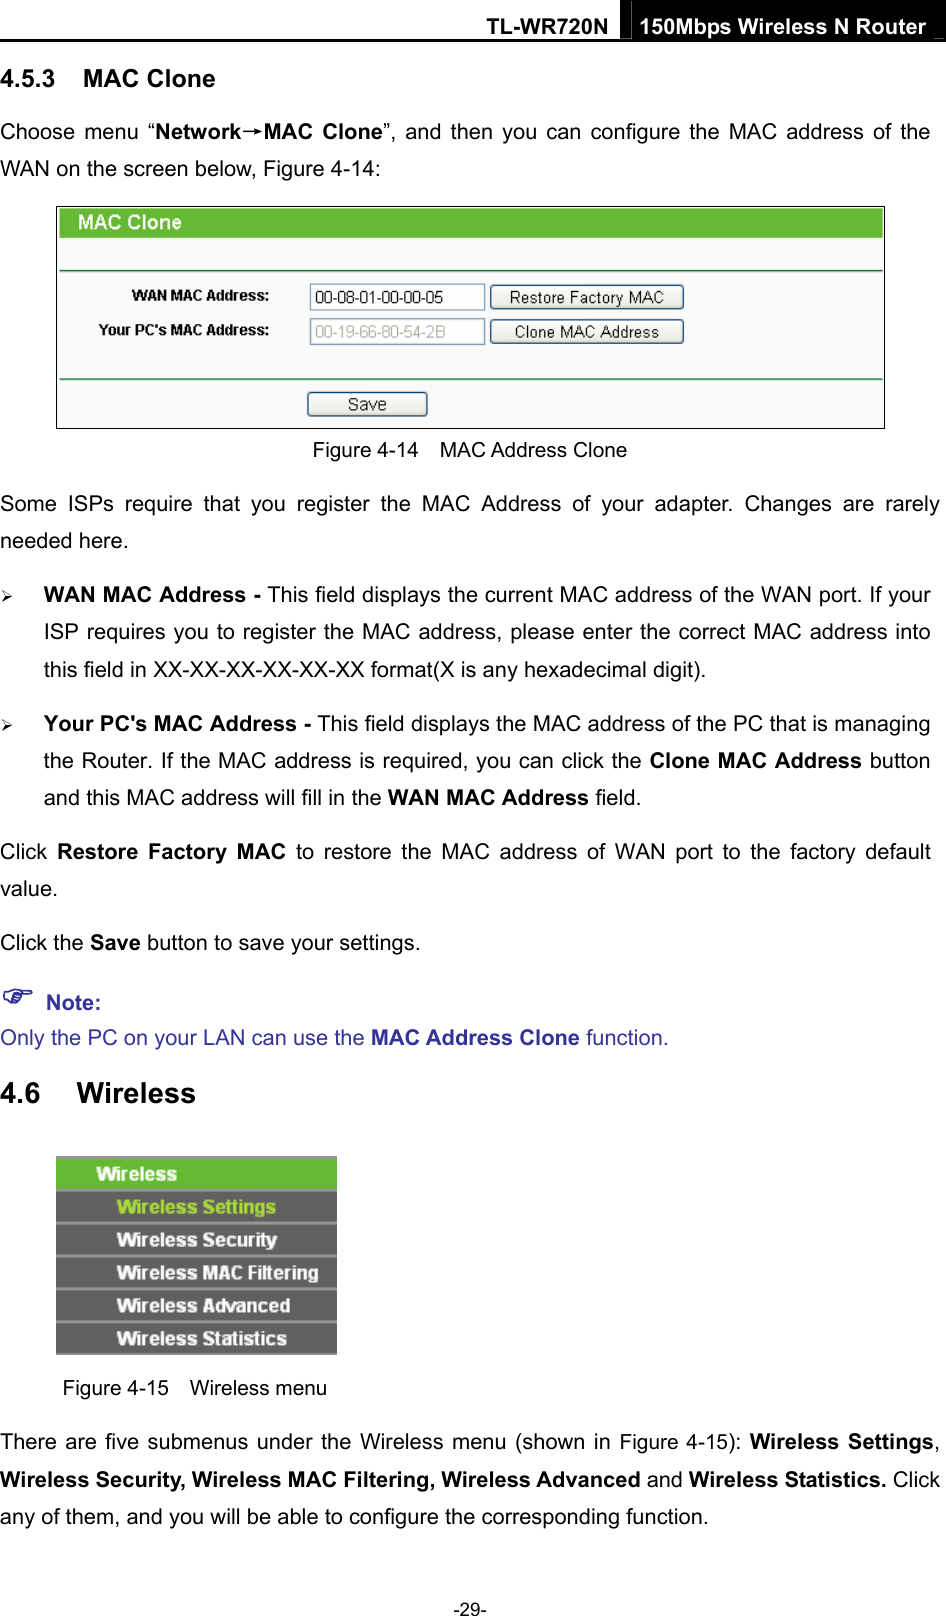 TL-WR720N 150Mbps Wireless N Router 4.5.3  MAC Clone Choose menu “Network→MAC Clone”, and then you can configure the MAC address of the WAN on the screen below, Figure 4-14:  Figure 4-14  MAC Address Clone Some ISPs require that you register the MAC Address of your adapter. Changes are rarely needed here. ¾ WAN MAC Address - This field displays the current MAC address of the WAN port. If your ISP requires you to register the MAC address, please enter the correct MAC address into this field in XX-XX-XX-XX-XX-XX format(X is any hexadecimal digit).   ¾ Your PC&apos;s MAC Address - This field displays the MAC address of the PC that is managing the Router. If the MAC address is required, you can click the Clone MAC Address button and this MAC address will fill in the WAN MAC Address field. Click  Restore Factory MAC to restore the MAC address of WAN port to the factory default value. Click the Save button to save your settings. ) Note:  Only the PC on your LAN can use the MAC Address Clone function. 4.6  Wireless  Figure 4-15  Wireless menu There are five submenus under the Wireless menu (shown in Figure 4-15): Wireless Settings, Wireless Security, Wireless MAC Filtering, Wireless Advanced and Wireless Statistics. Click any of them, and you will be able to configure the corresponding function.   -29- 